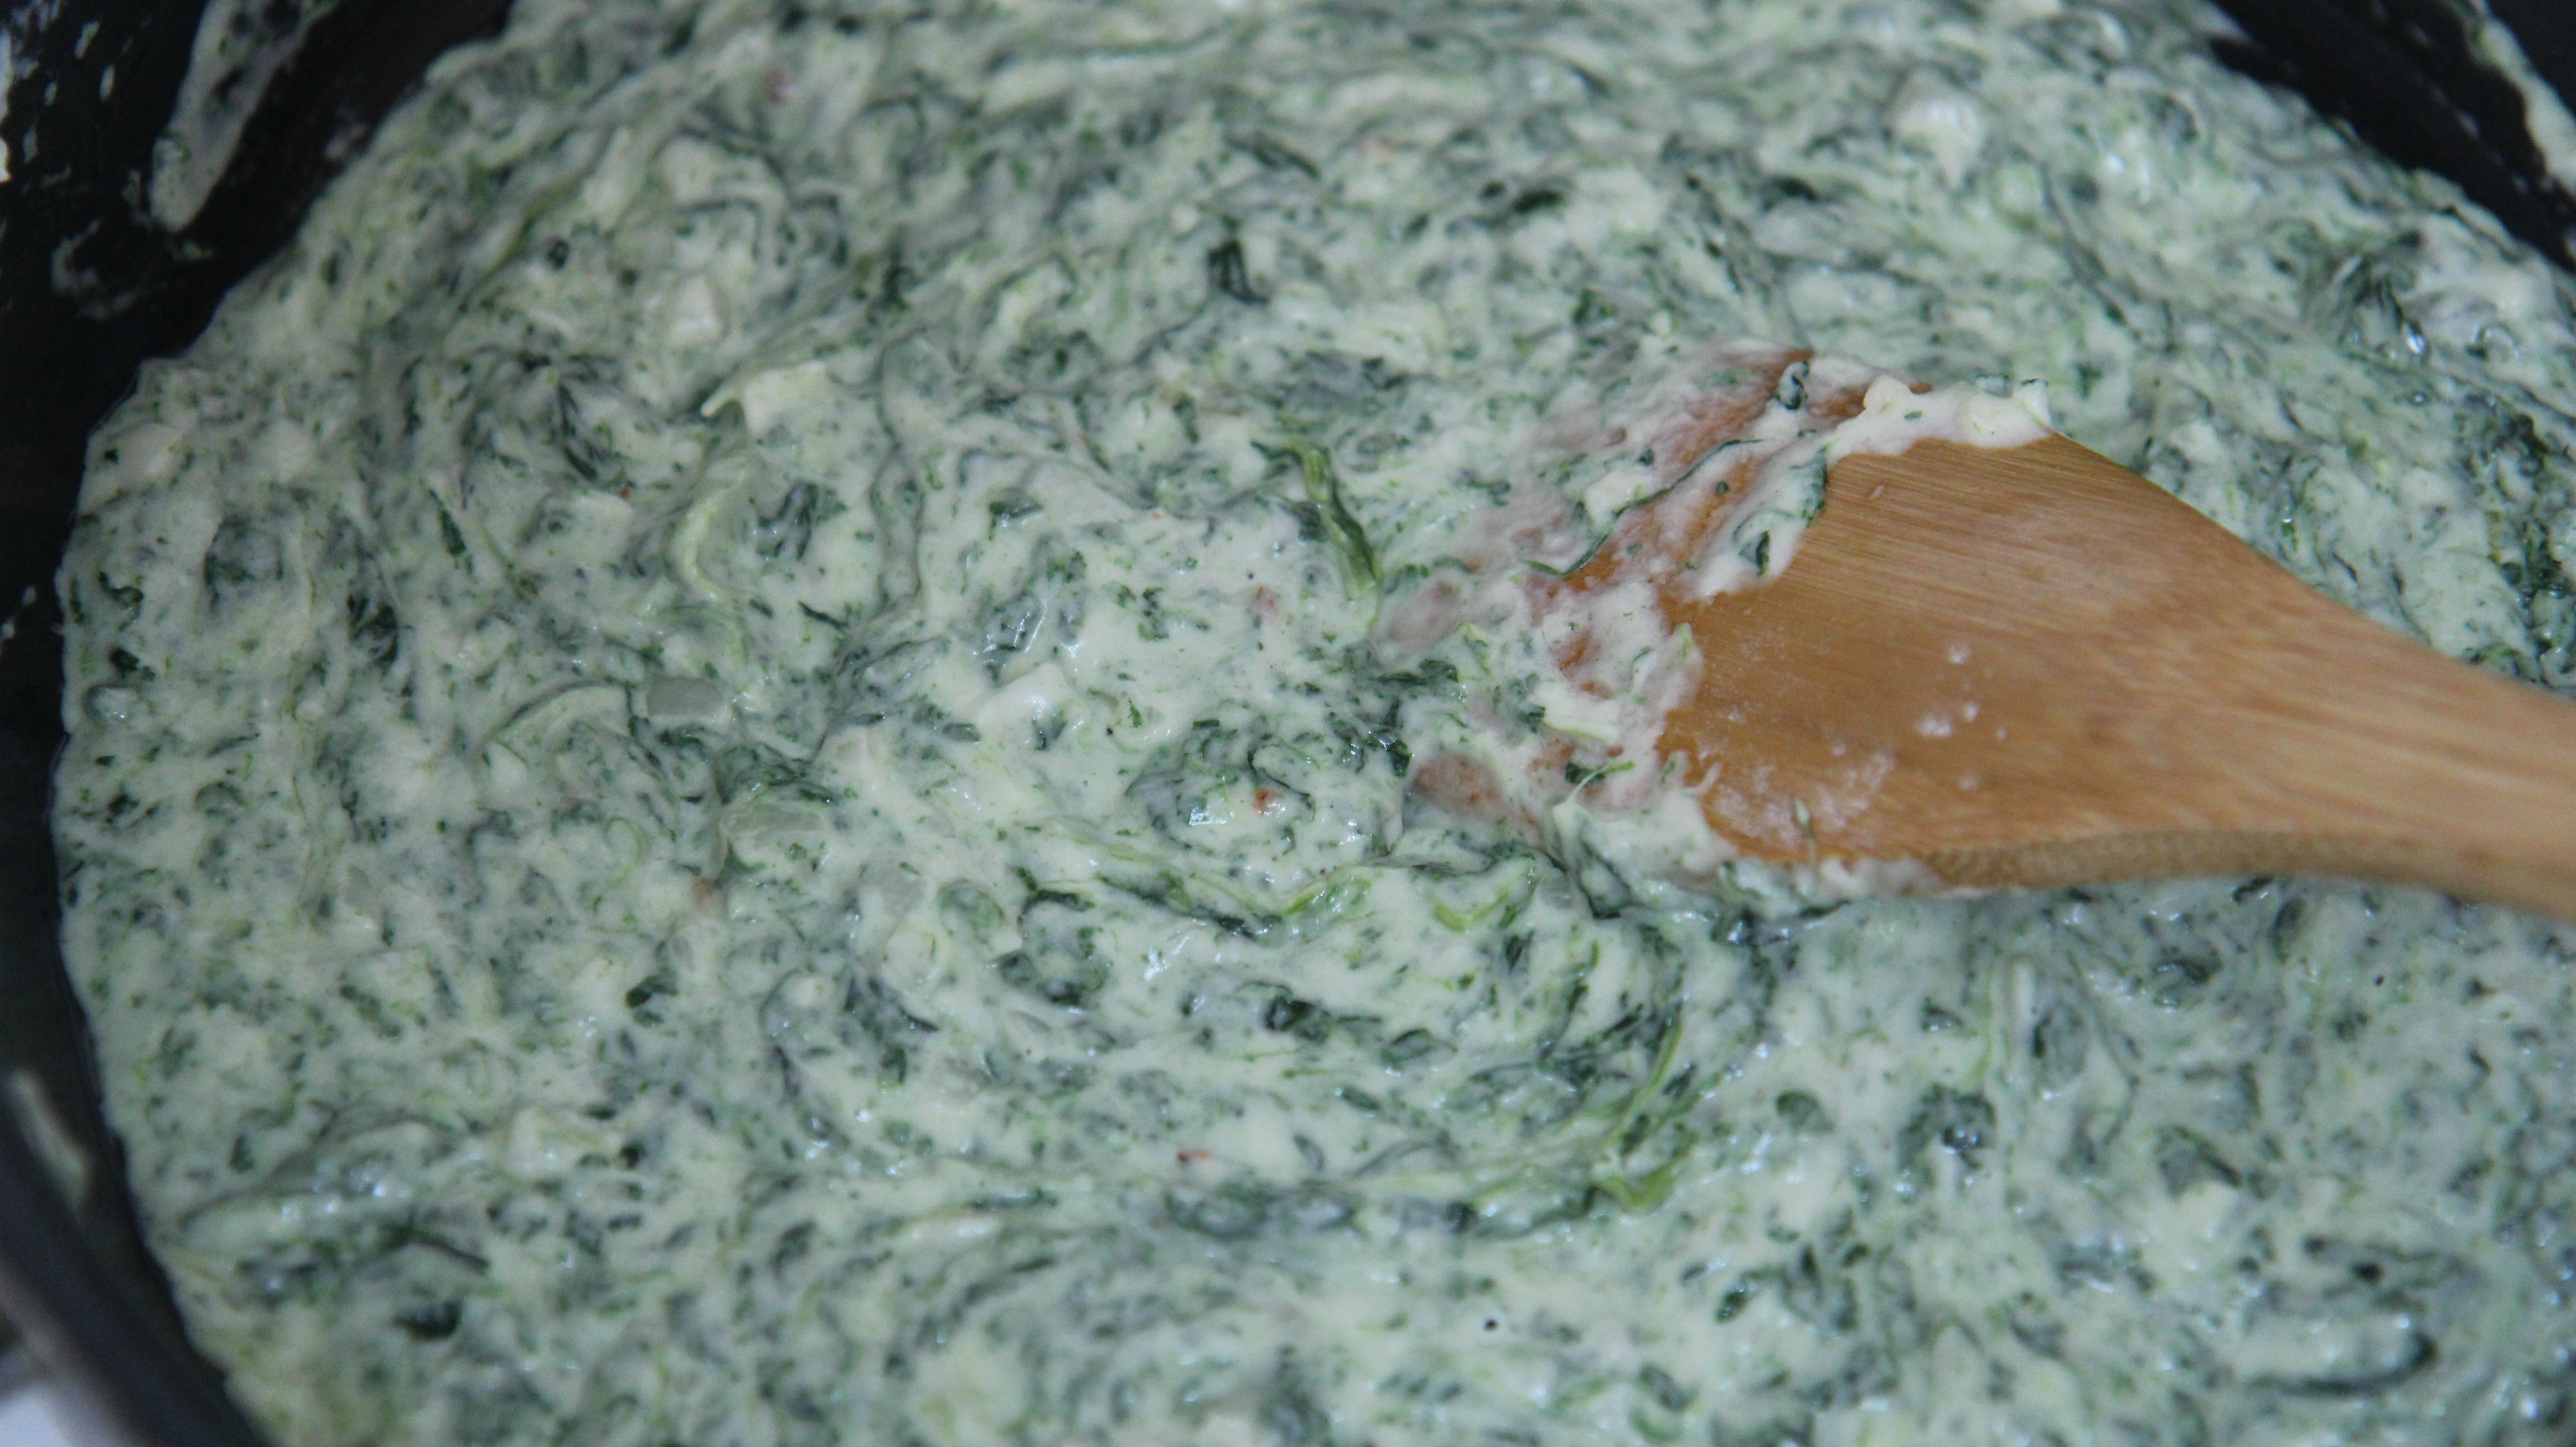 A delicious creamy mix of milk, cream cheese, and spinach makes this recipe super easy and fool-proof!